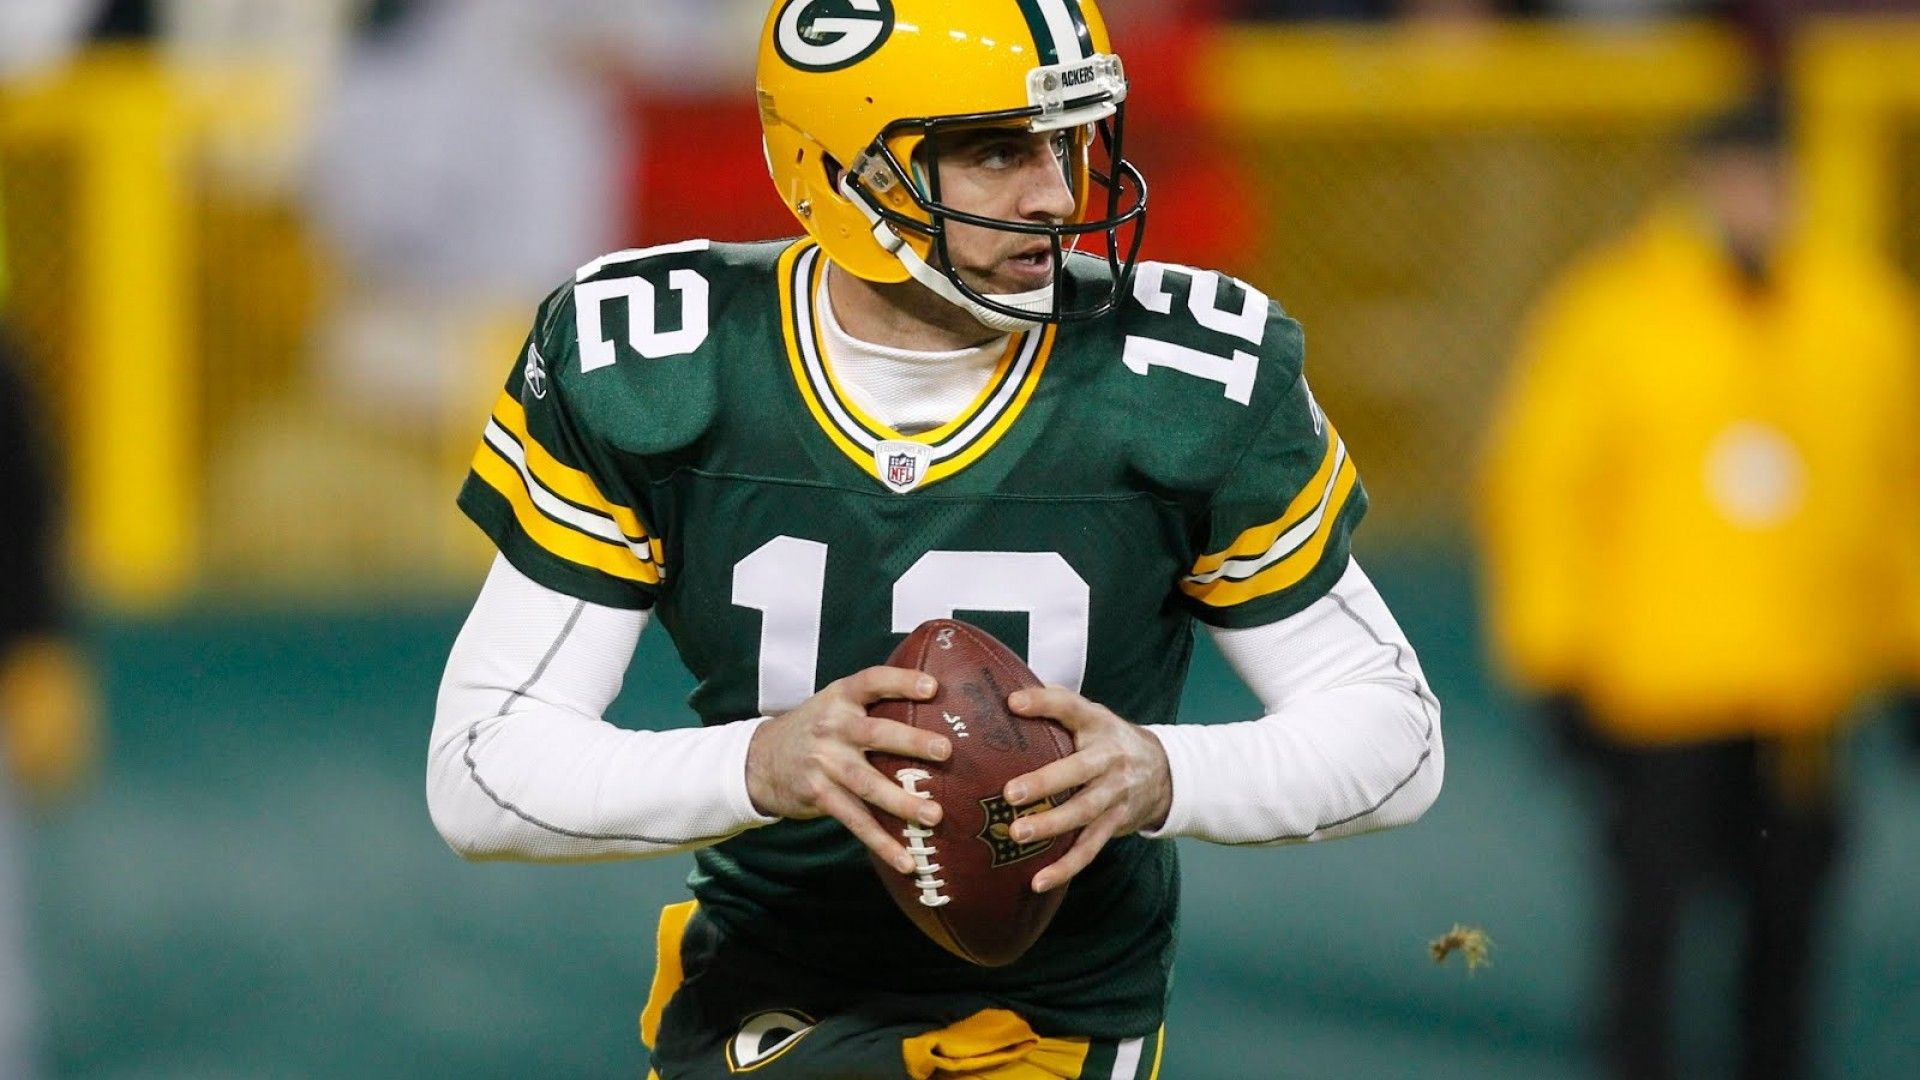 Gallery for - aaron rodgers wallpaper 2013